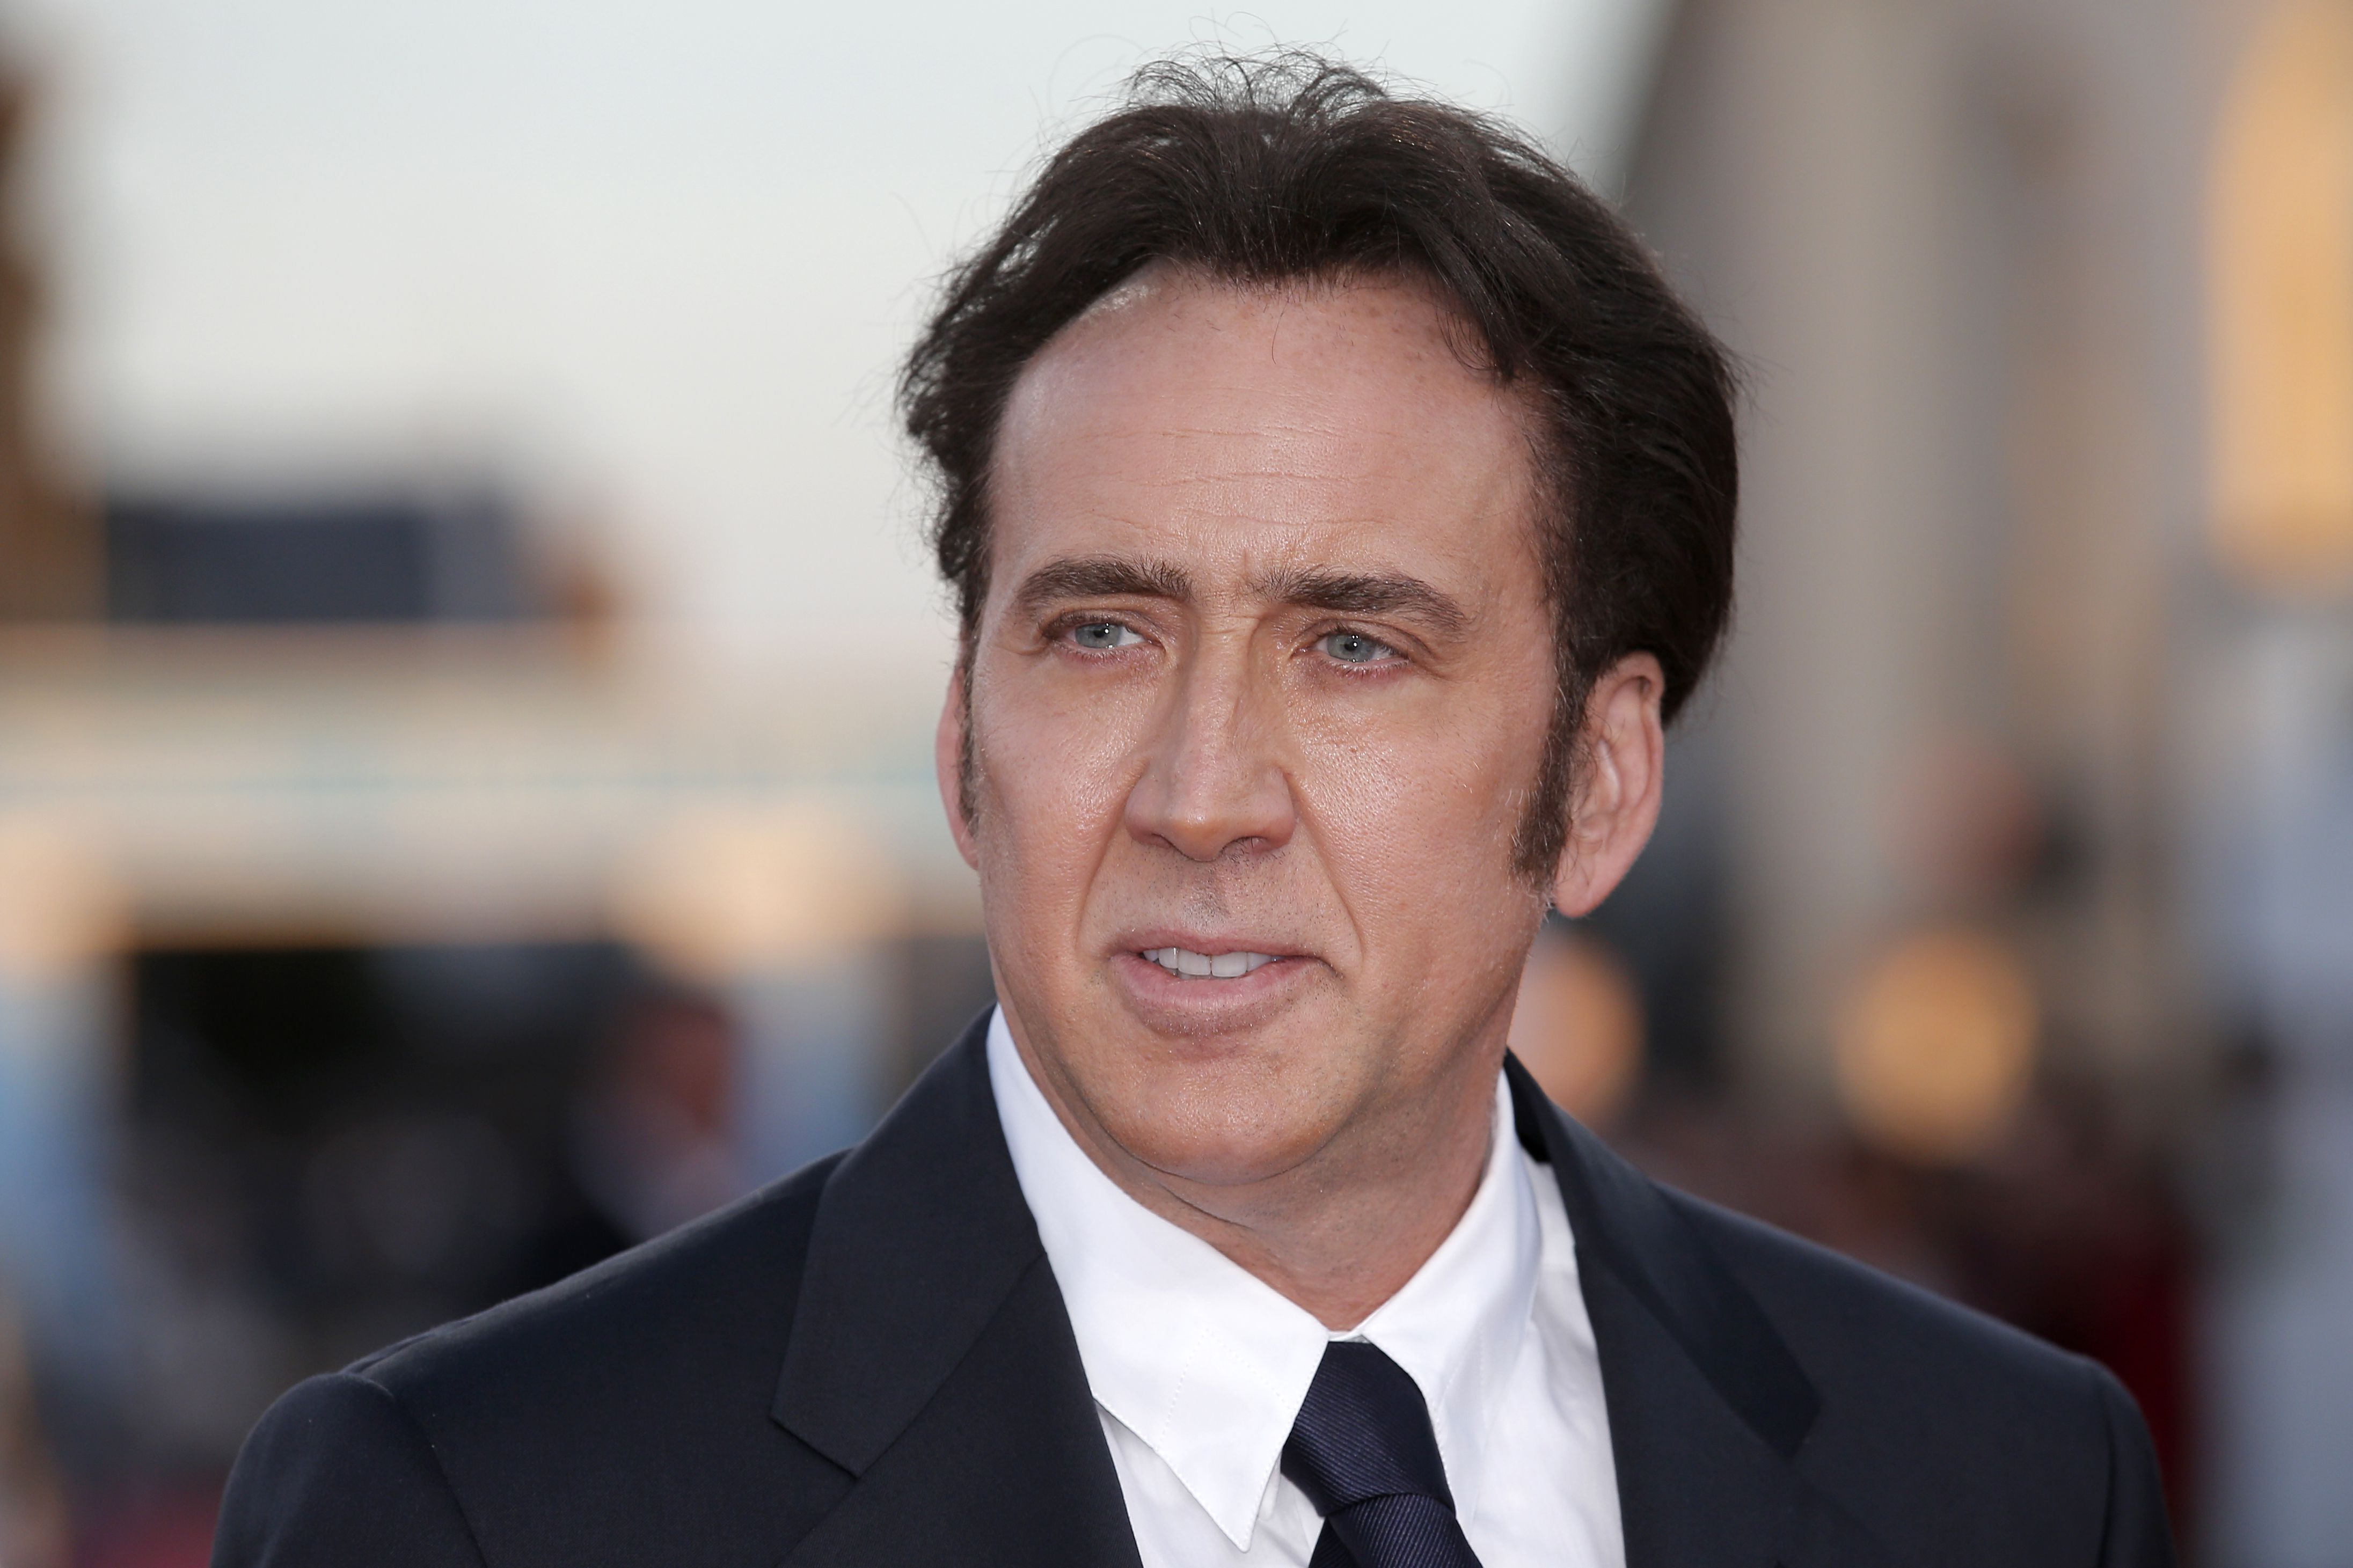 Nick Cage